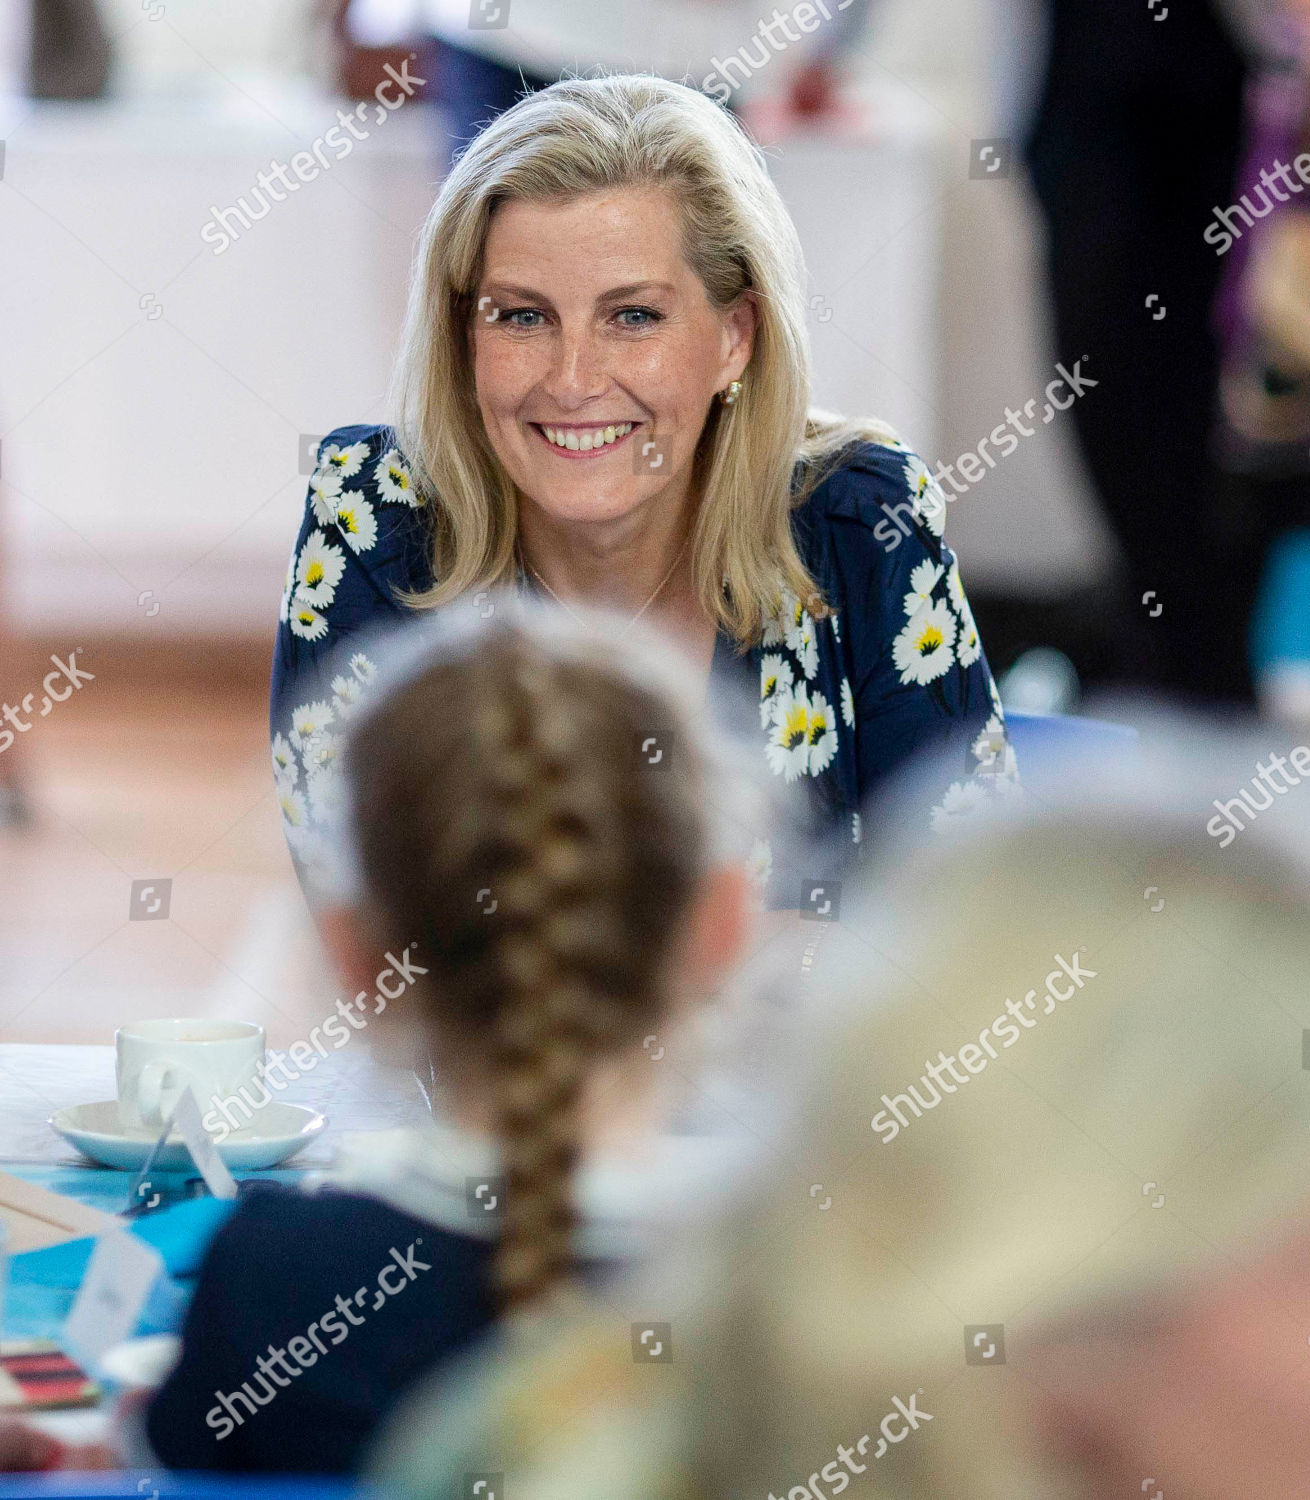 sophie-countess-of-wessex-visits-the-me2-club-tea-party-woodley-uk-shutterstock-editorial-9885213i.jpg